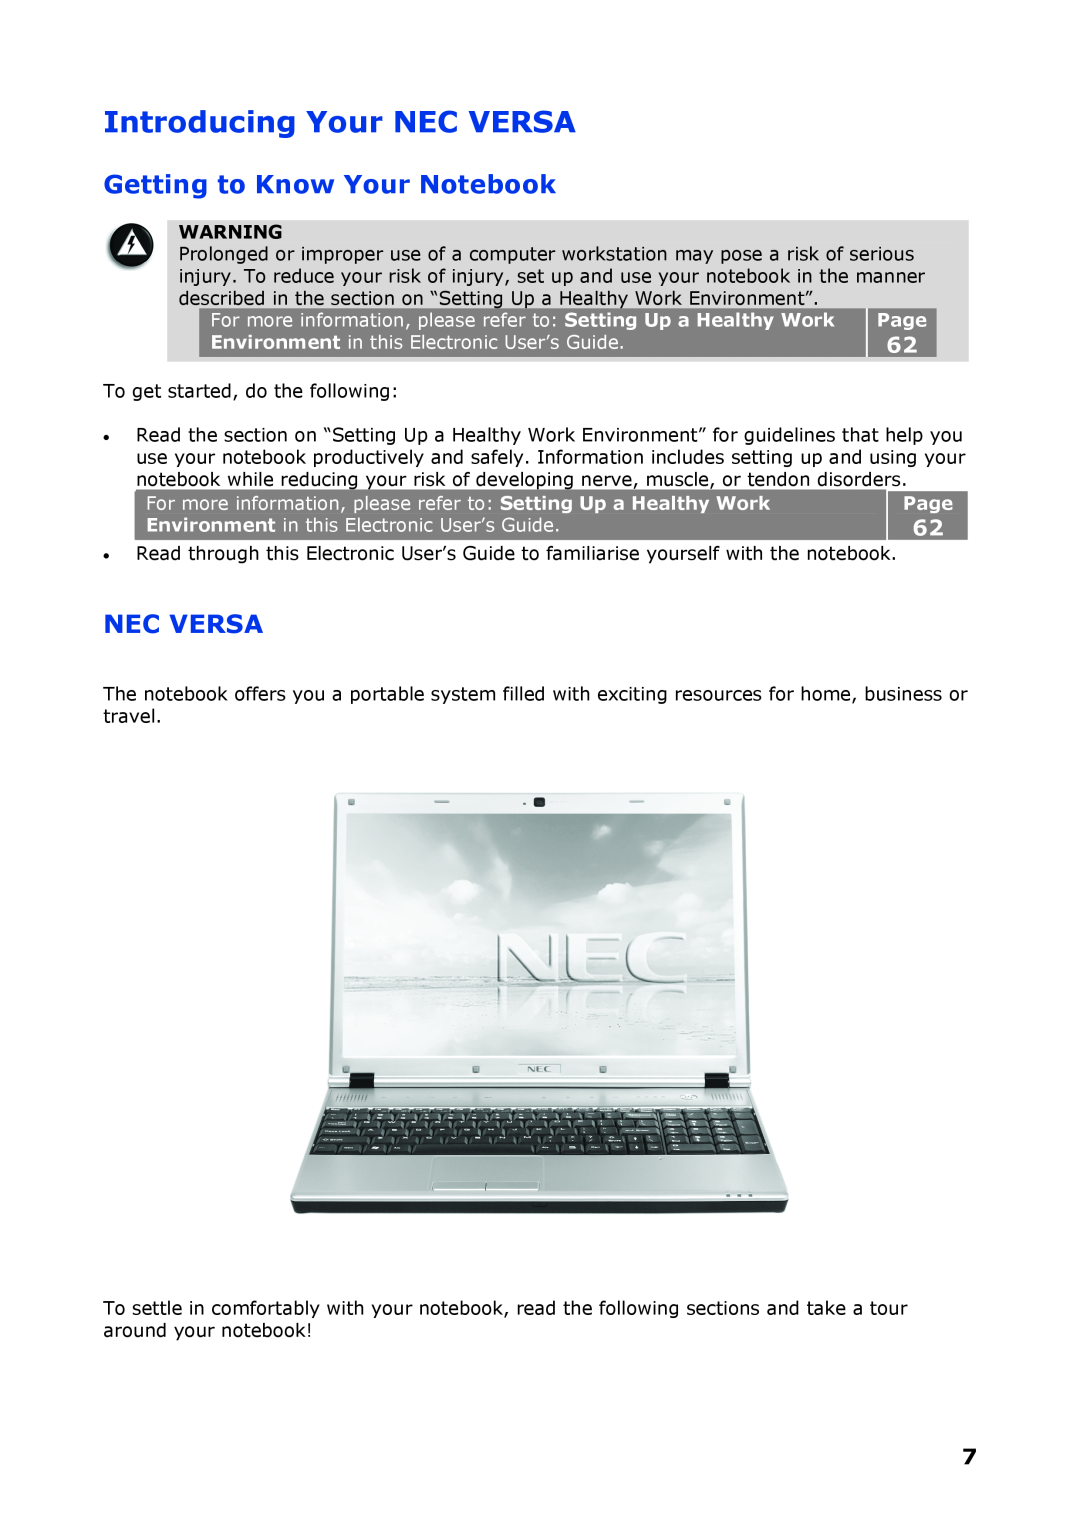 NEC P8510 Introducing Your NEC VERSA, Getting to Know Your Notebook, Nec Versa, To get started, do the following, Page 